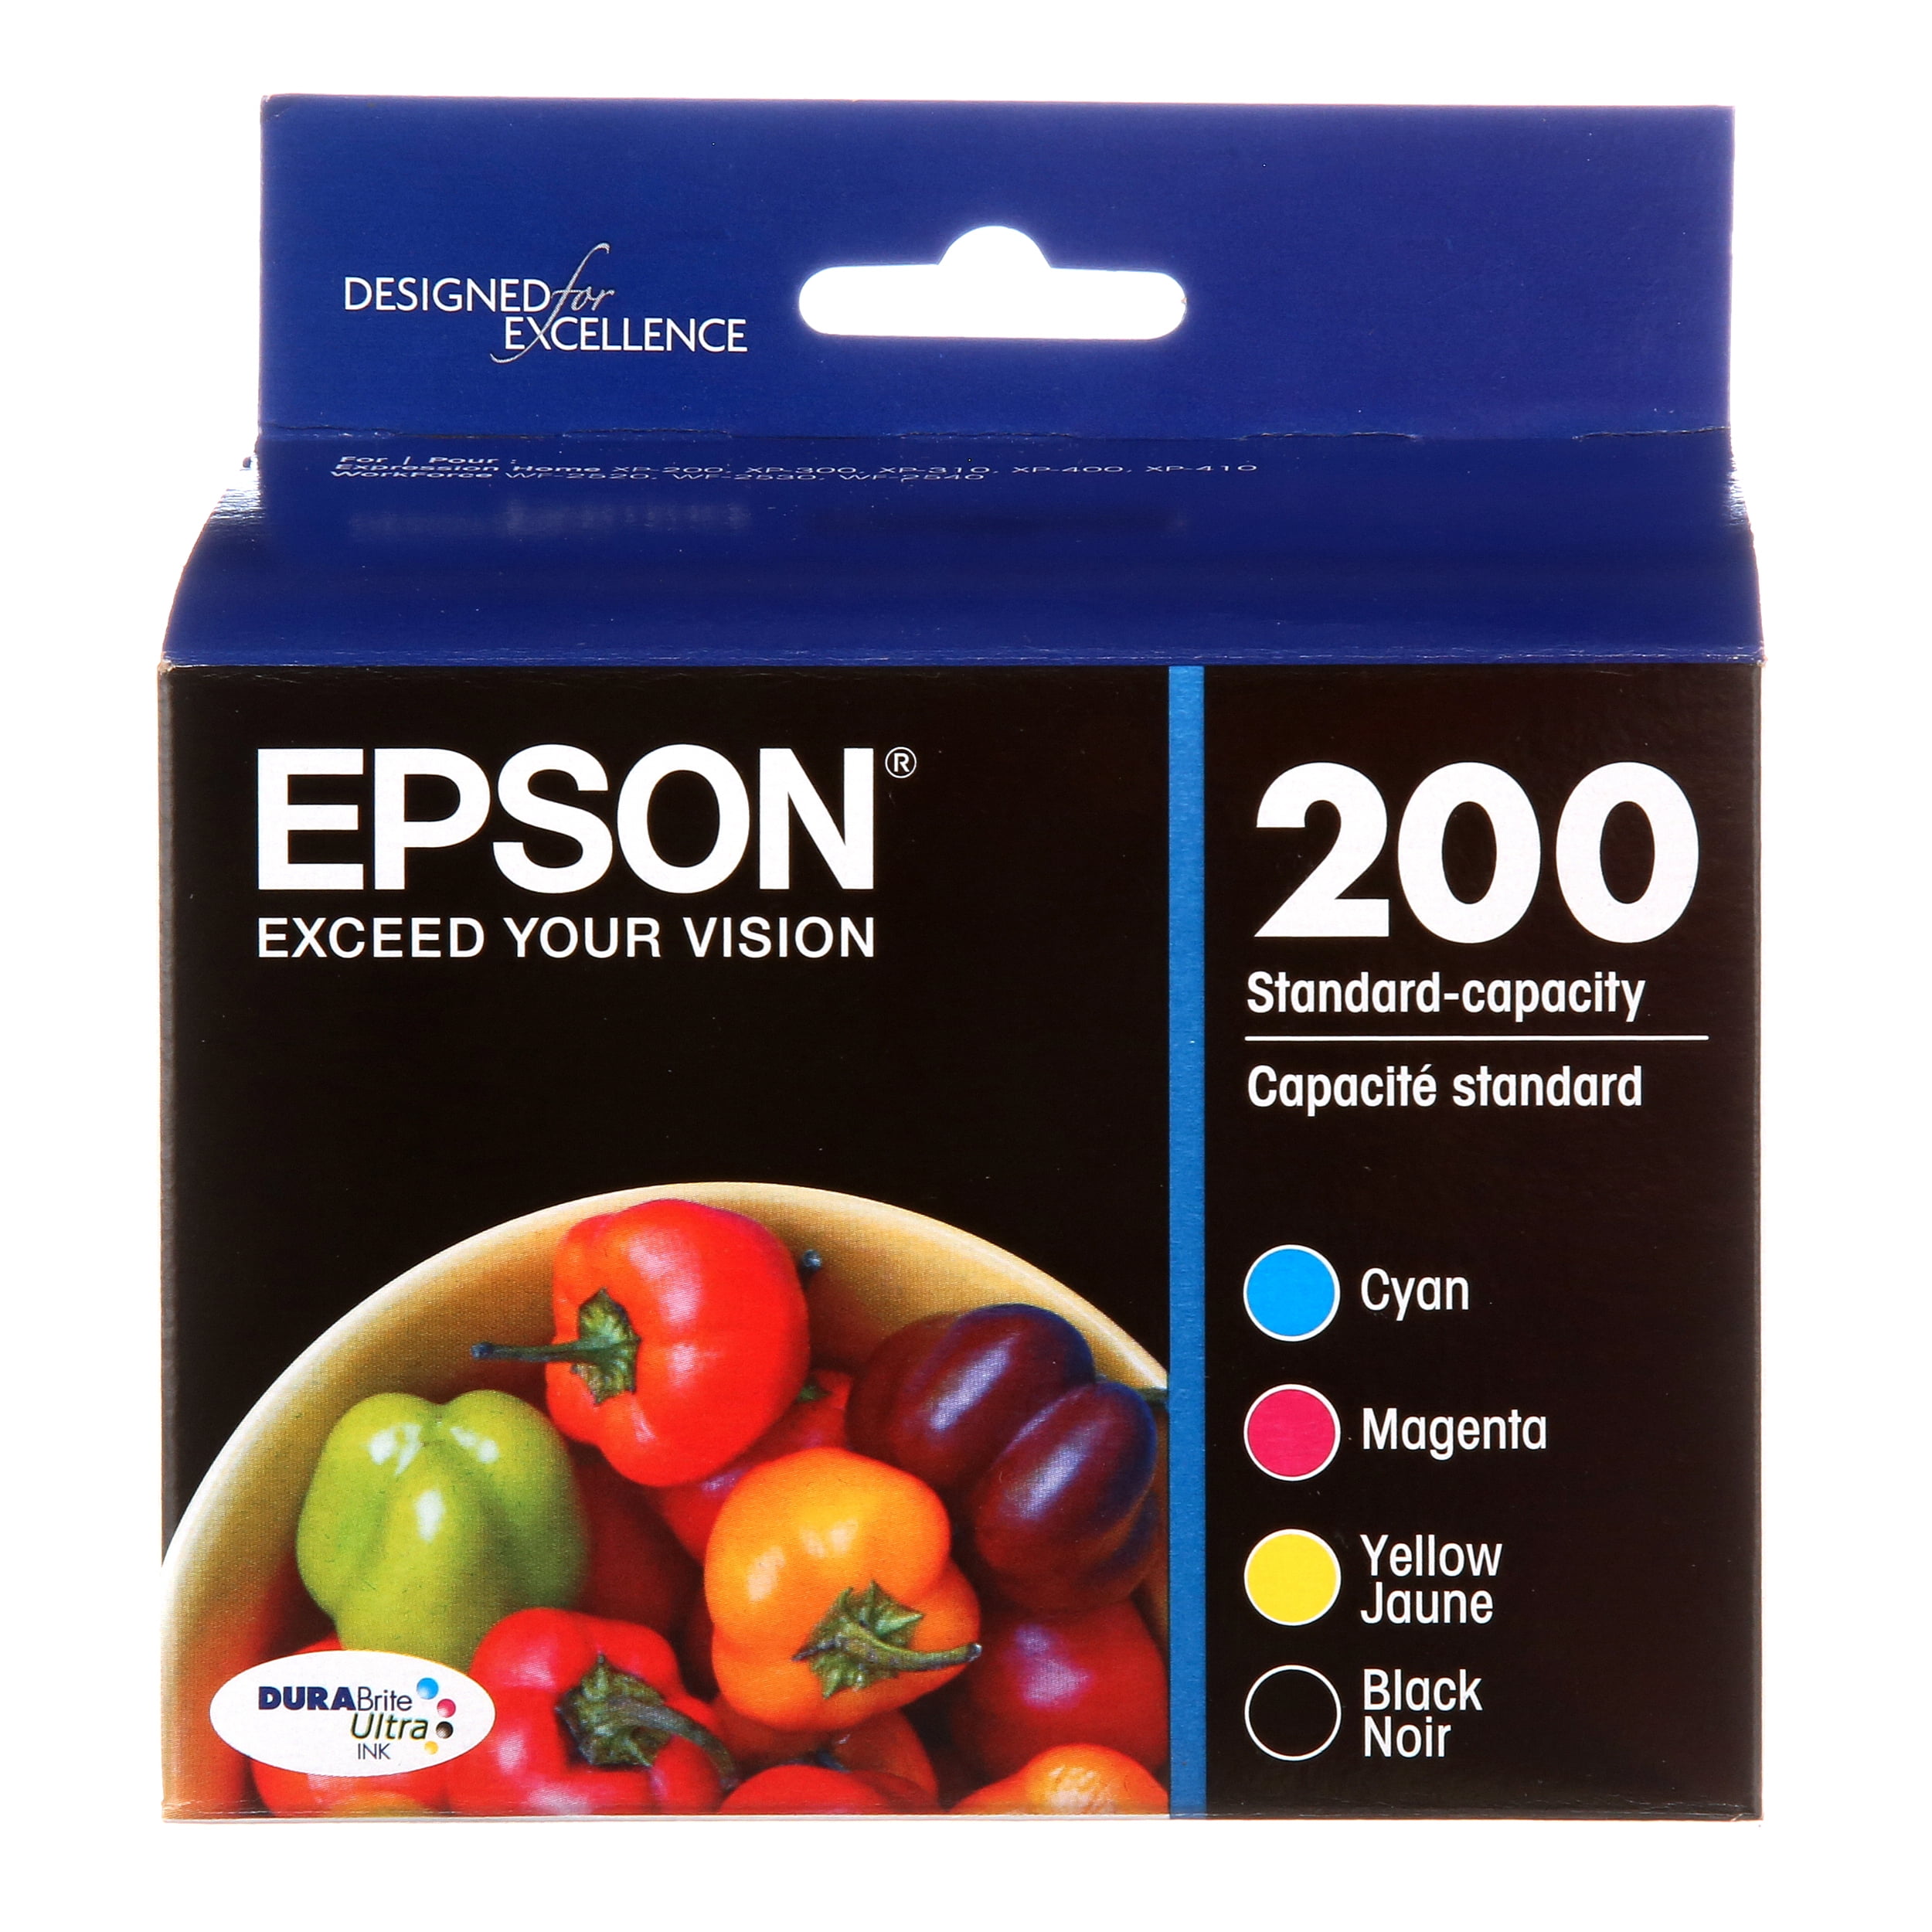 T200XL220-S EPSON T200 DURABrite Ultra Ink High Capacity Cyan Cartridge for select Epson Expression and WorkForce Printers 